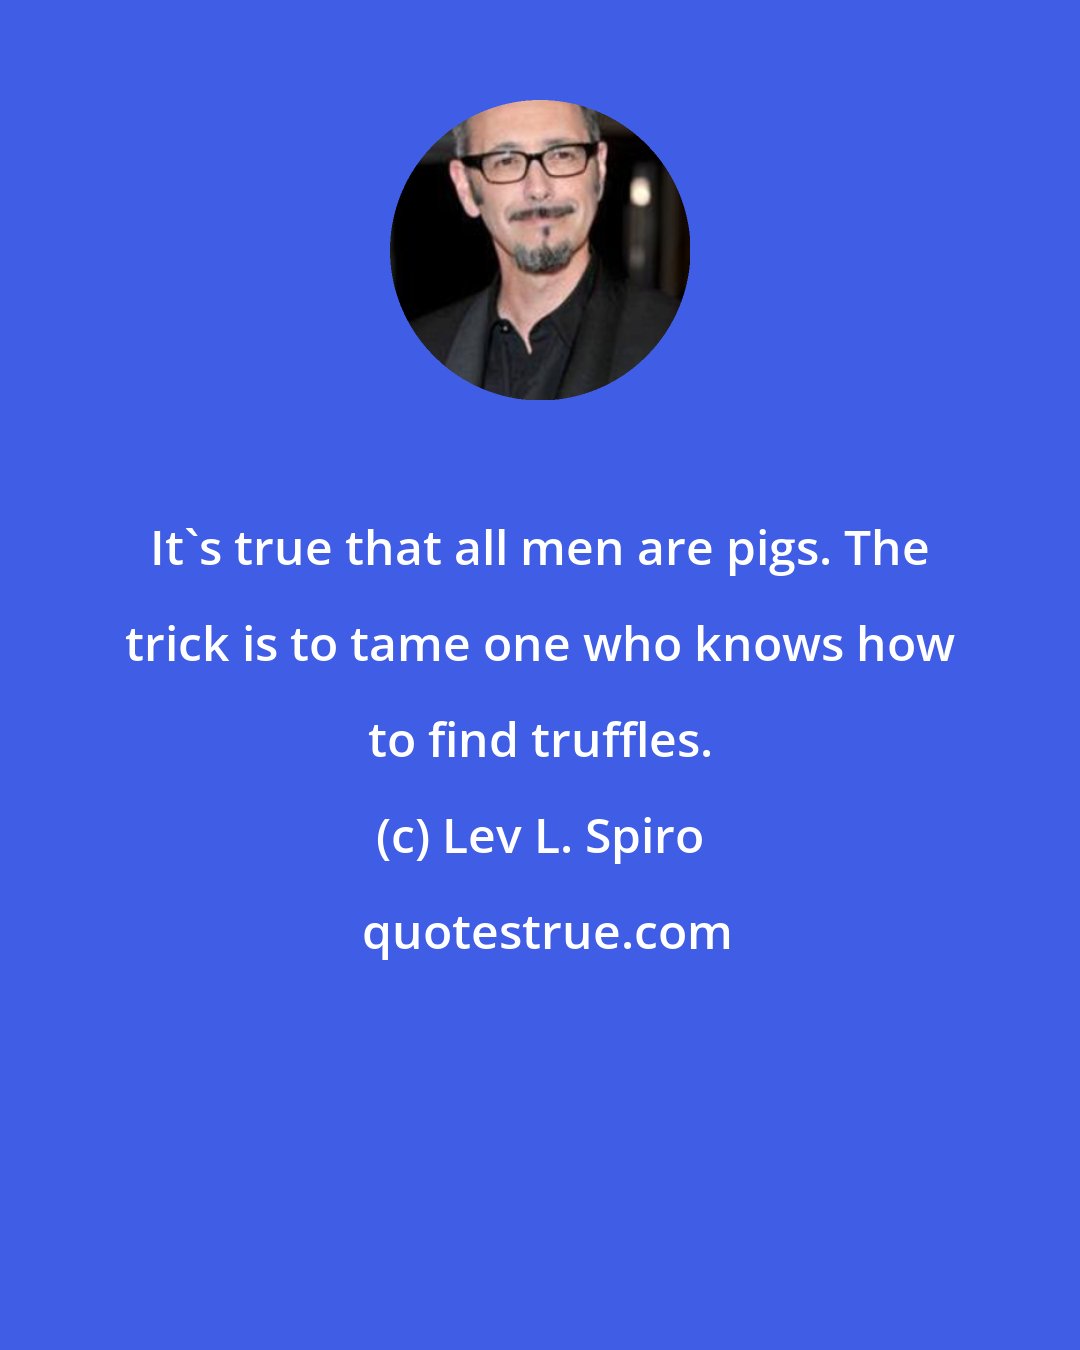 Lev L. Spiro: It's true that all men are pigs. The trick is to tame one who knows how to find truffles.